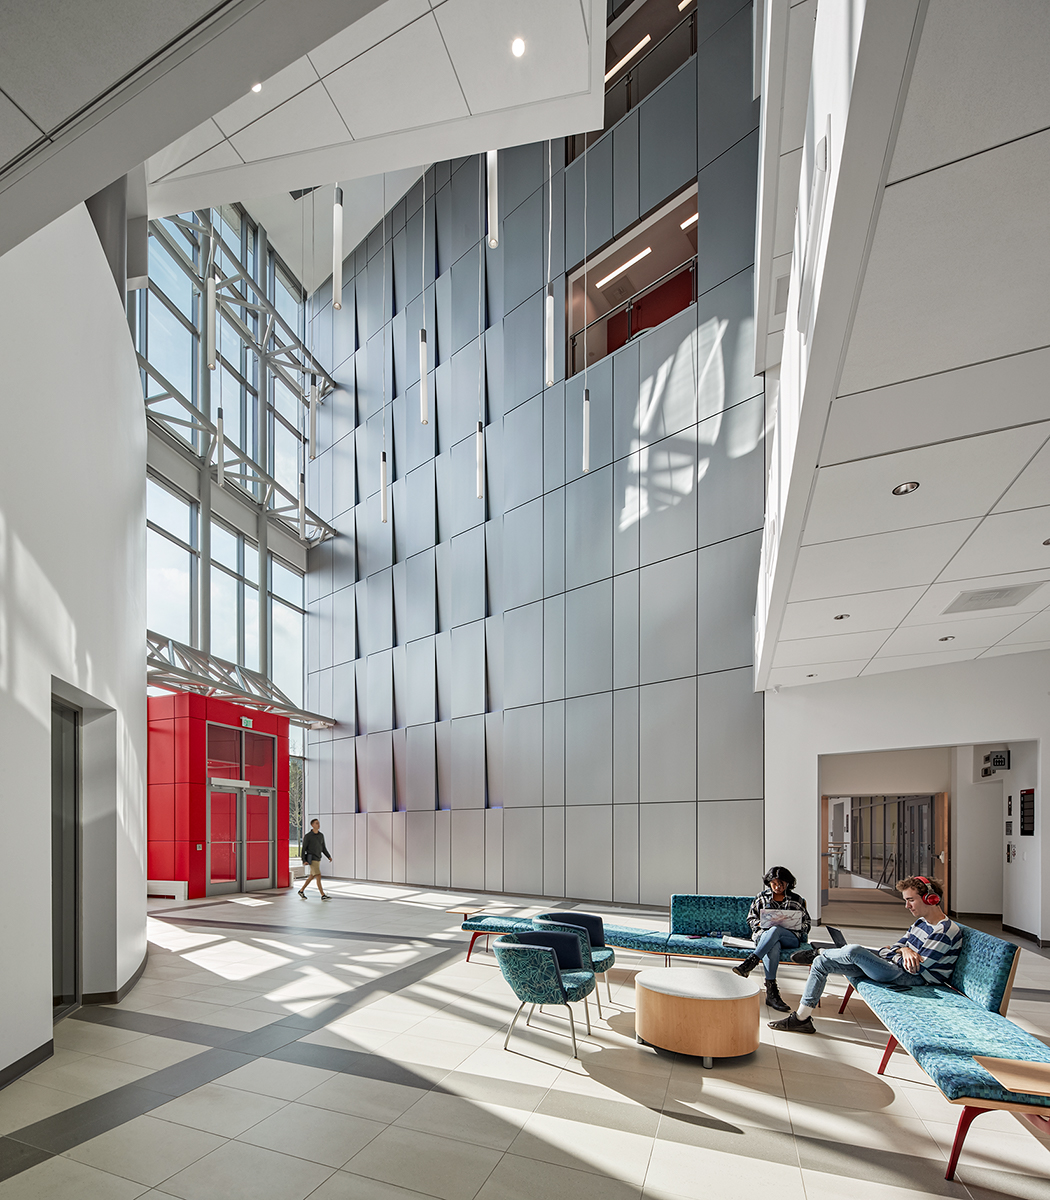 entrance and lobby for the Richard Weeks Hall of Engineering at rutgers